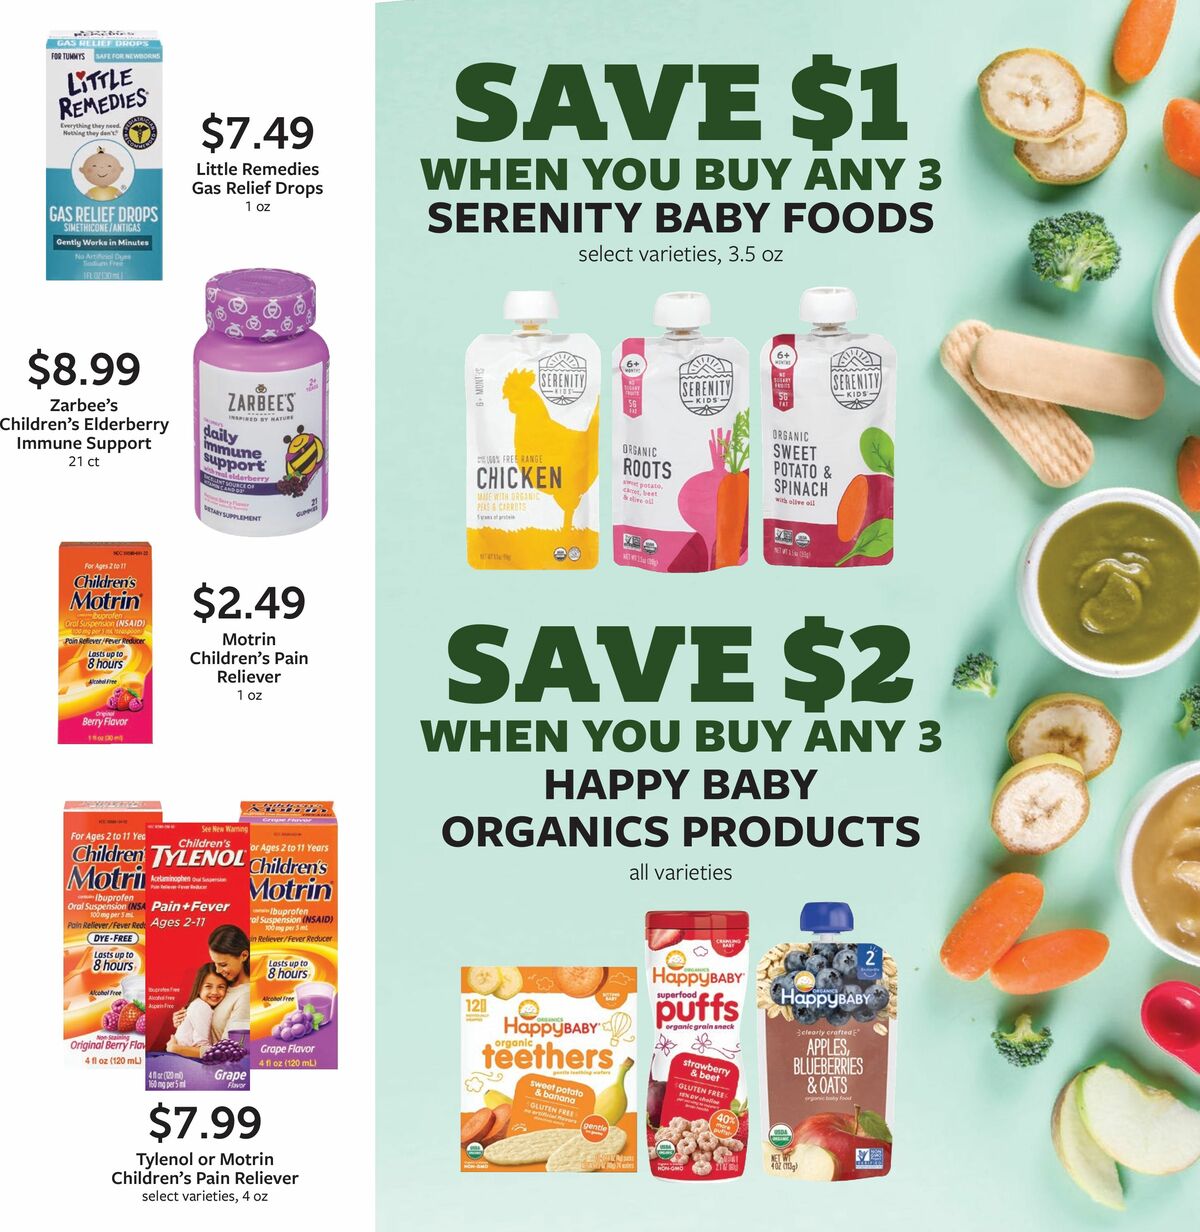 Fareway October 23 Weekly Ad from October 2